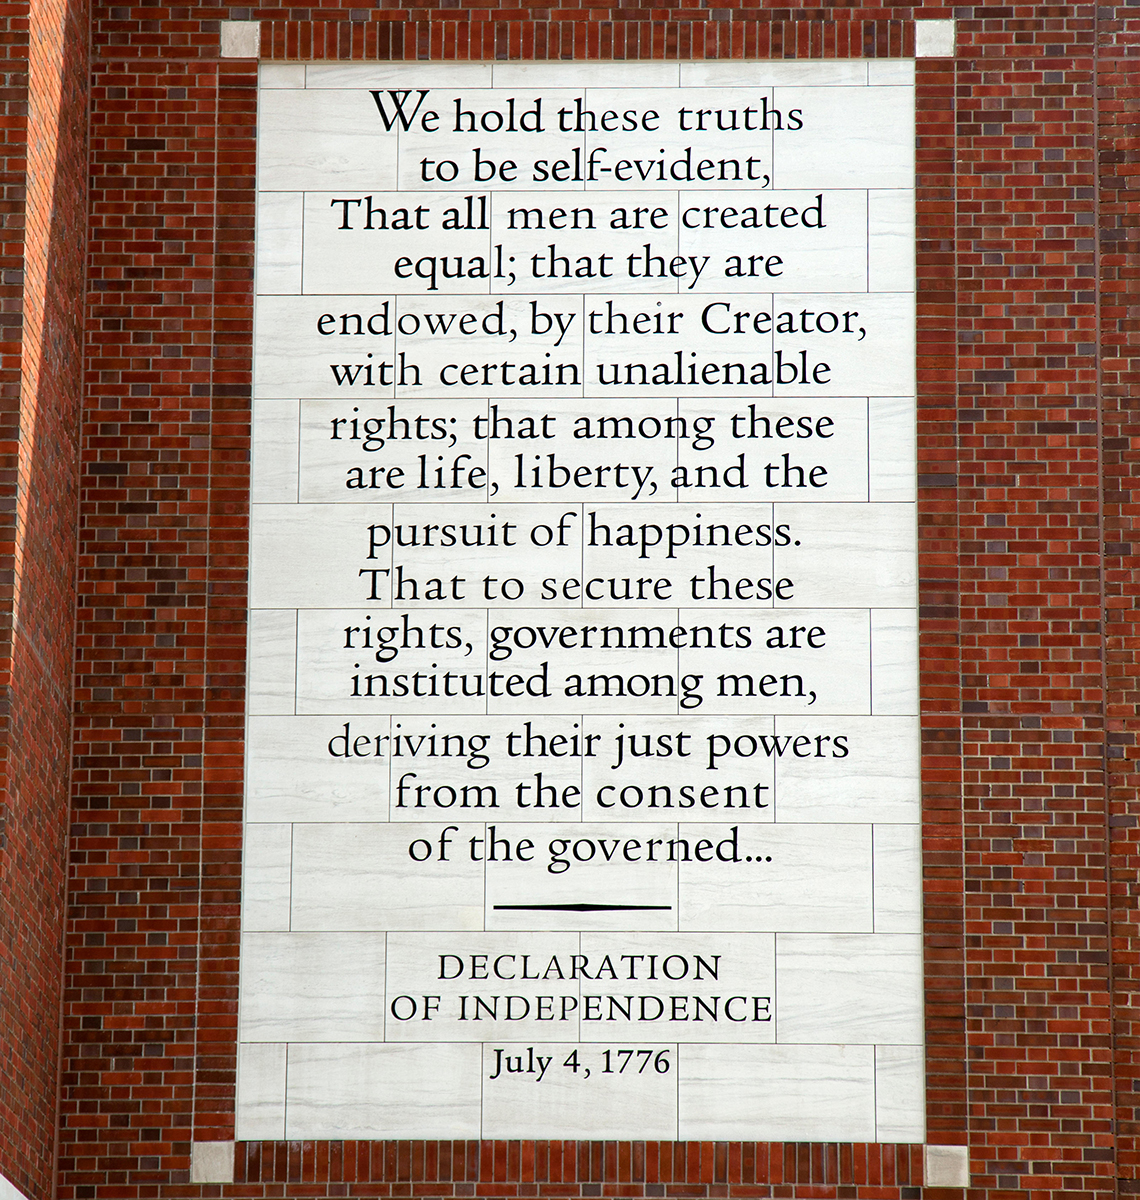 Passage from the declaration of independence